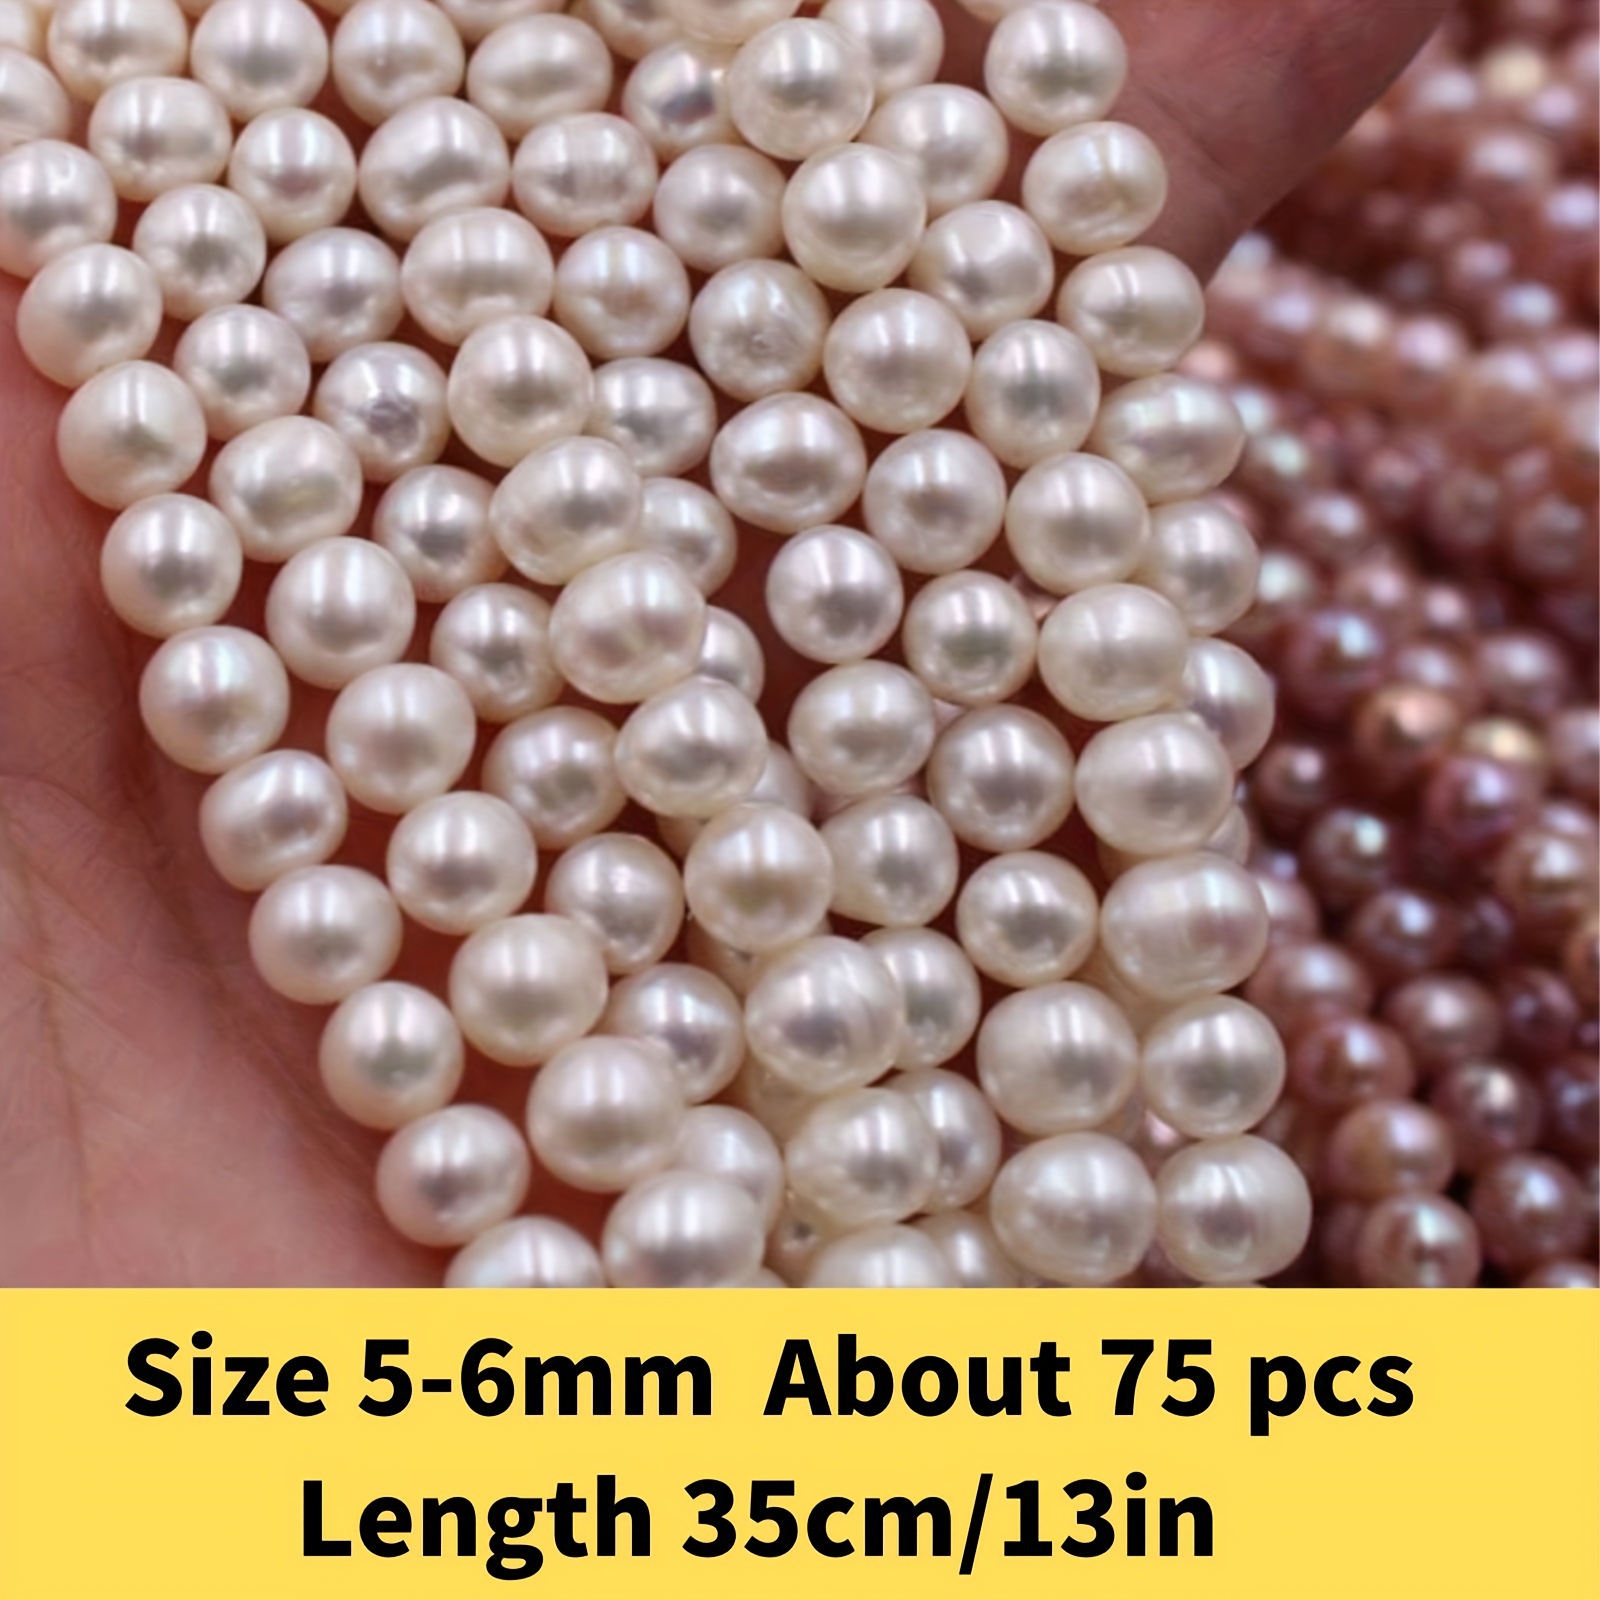 Freshwater Pearls Champagne Beige Color Almost Round 6mm x 5mm Beads Strand  16